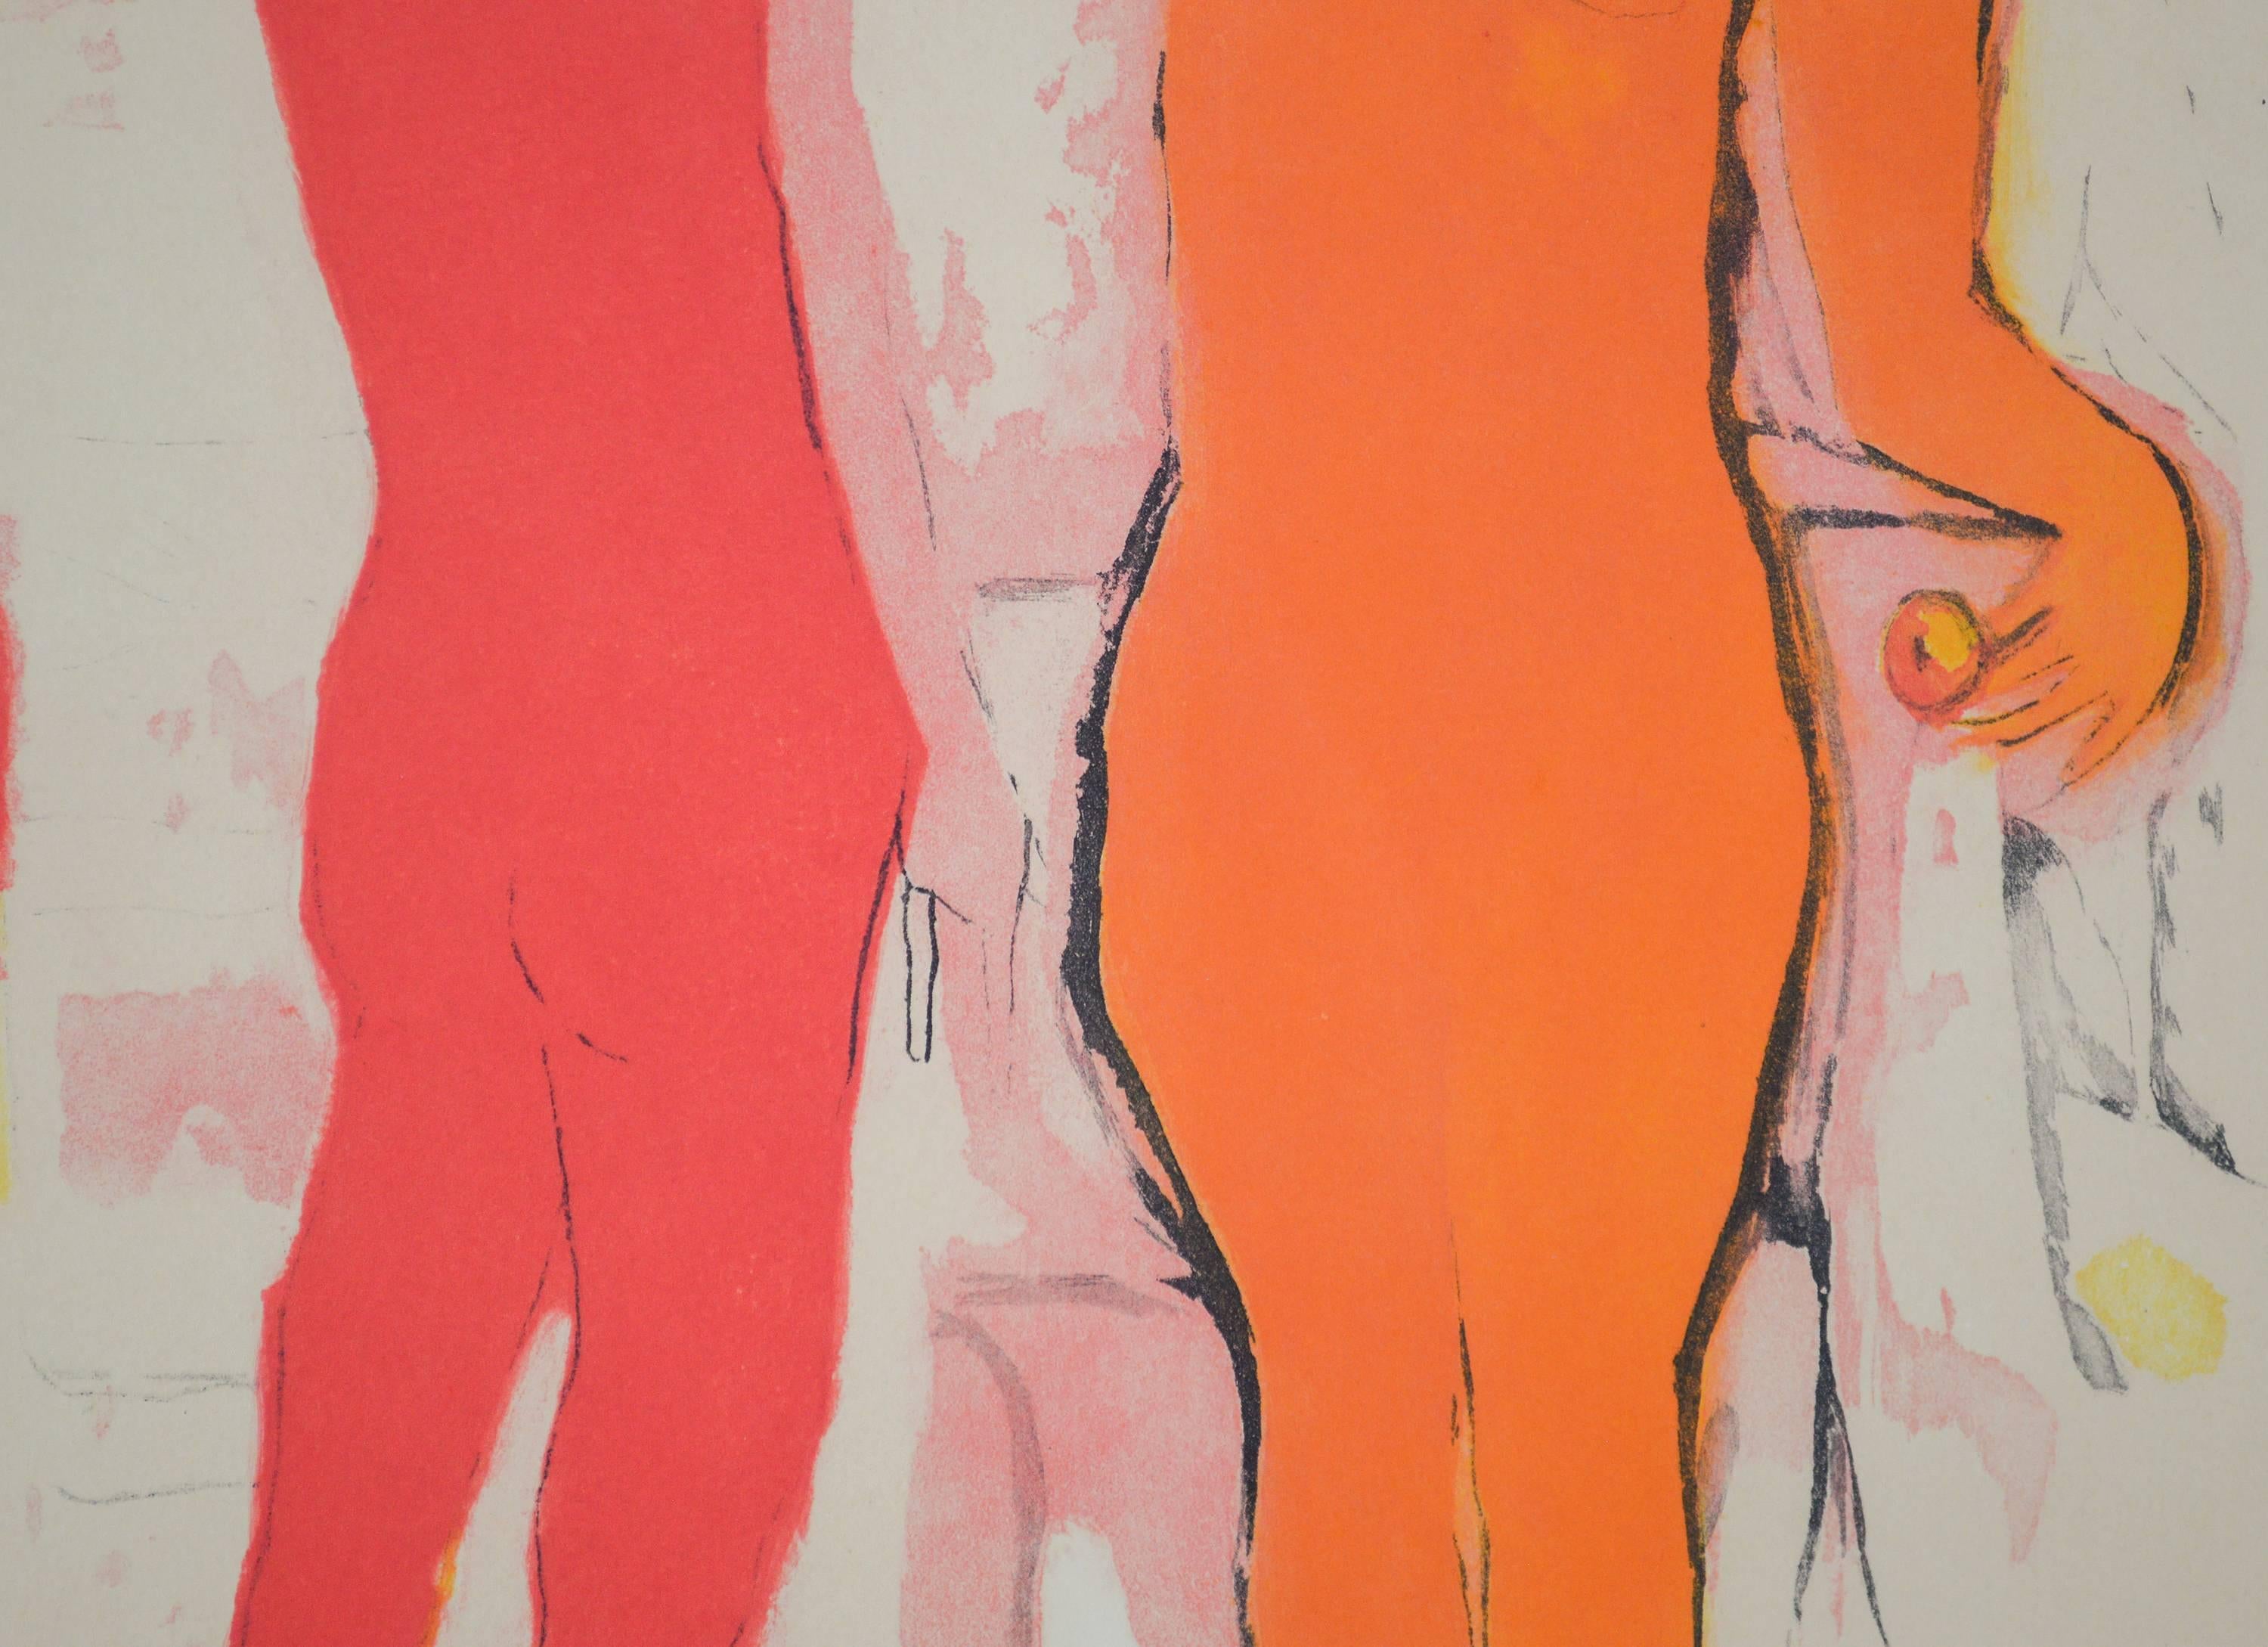 A figurative lithograph, Untitled (From Shakespeare I) by Modern artist Marino Marini, depicts two abstracted figures executed in orange and cerise against a neutral beige background. Signed lower right, 